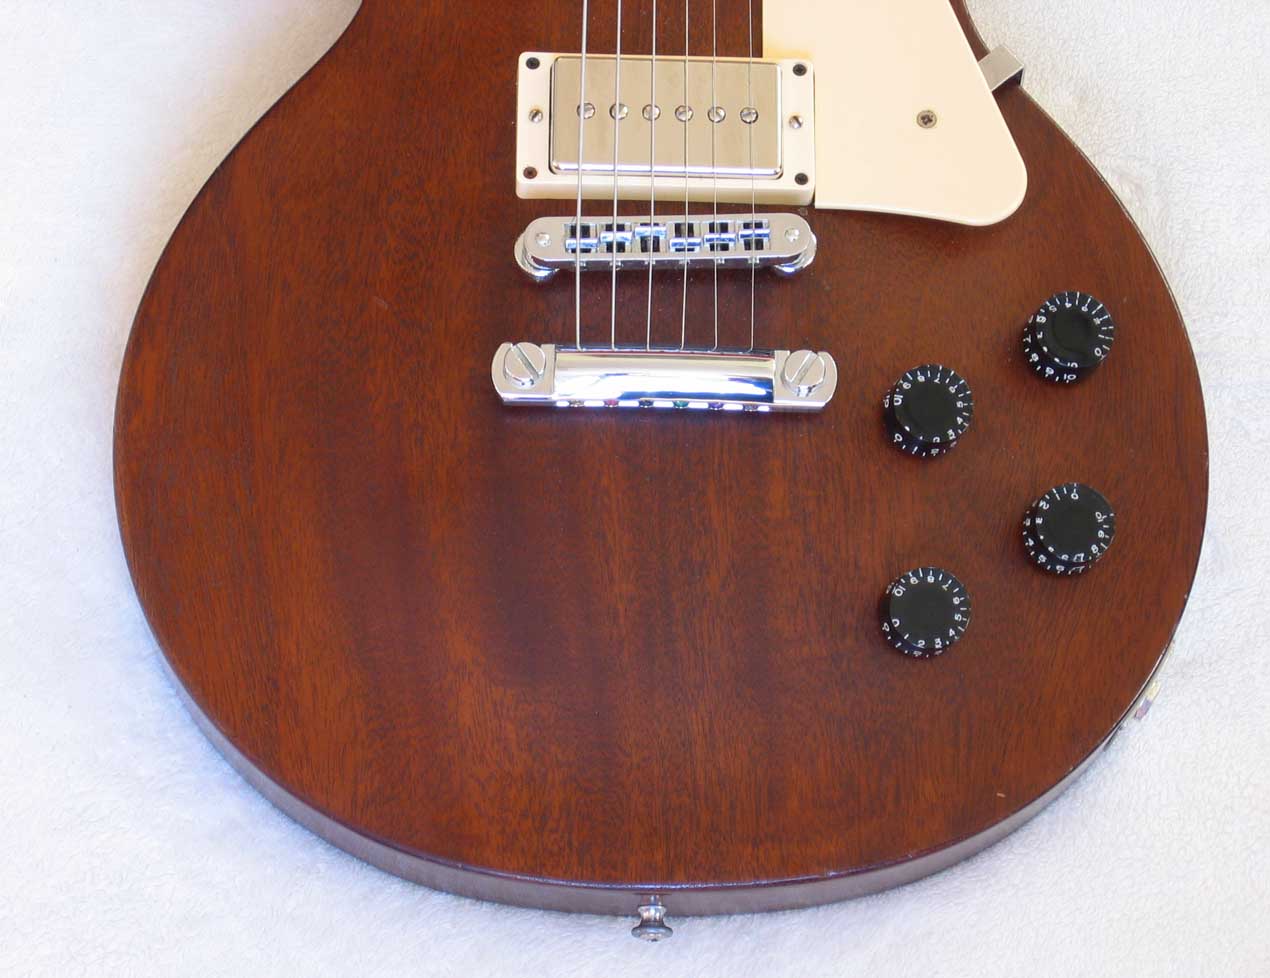 Gibson Les Paul Studio Electric Guitar Upgraded w/Seymour Duncan Single Coil Pickups, w/ Case, Mahogany Top